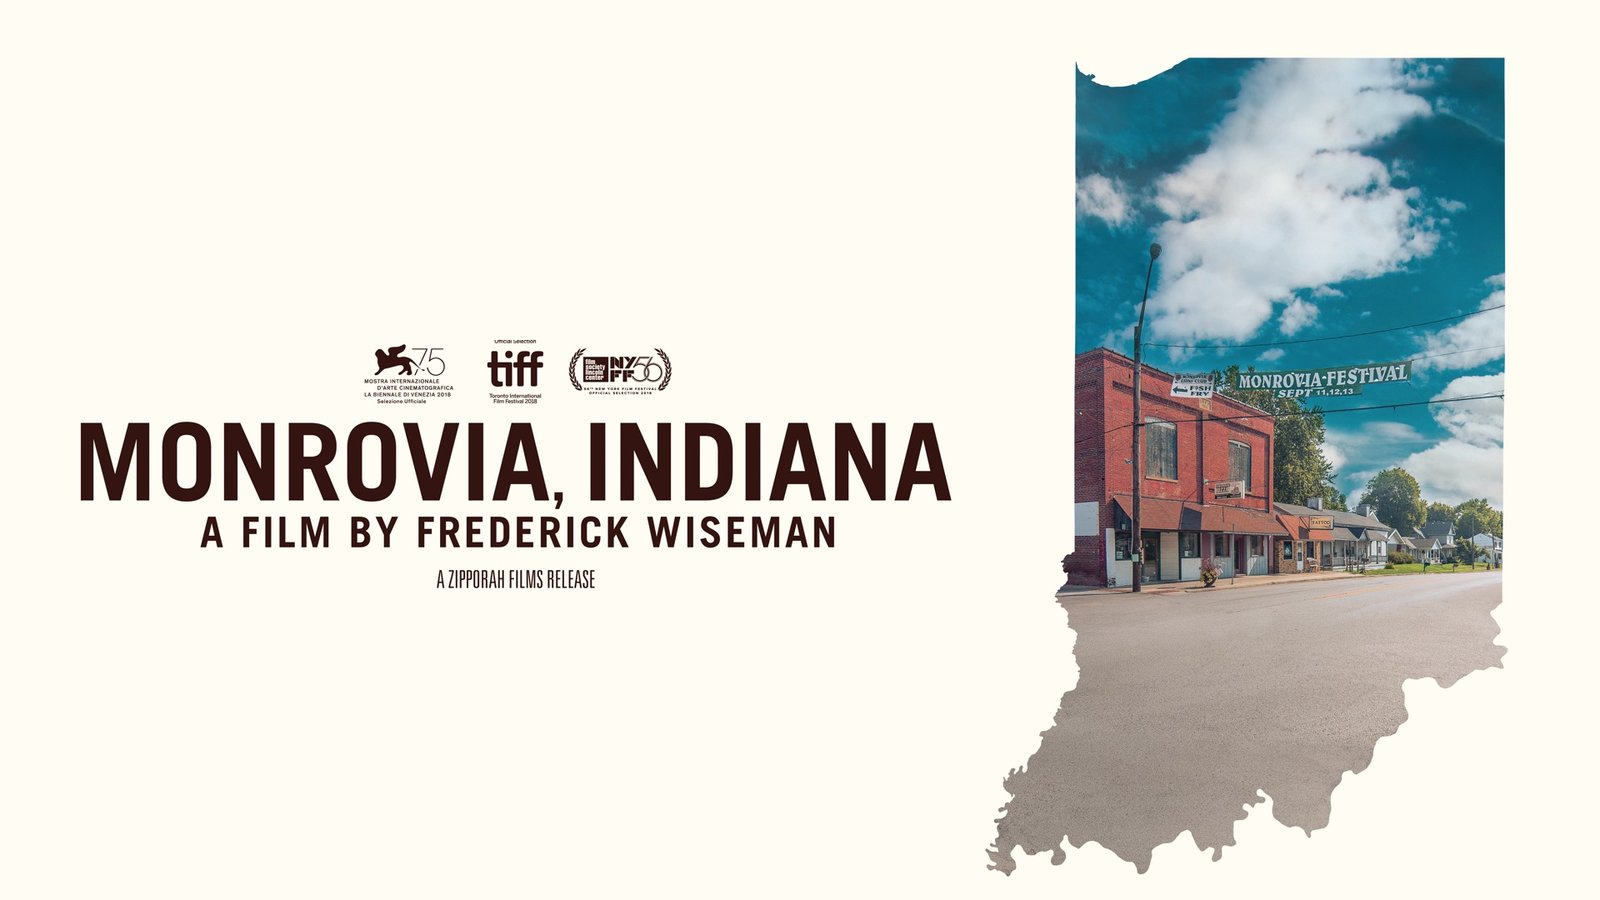 Monrovia, Indiana - A Portrait of Life in Rural America